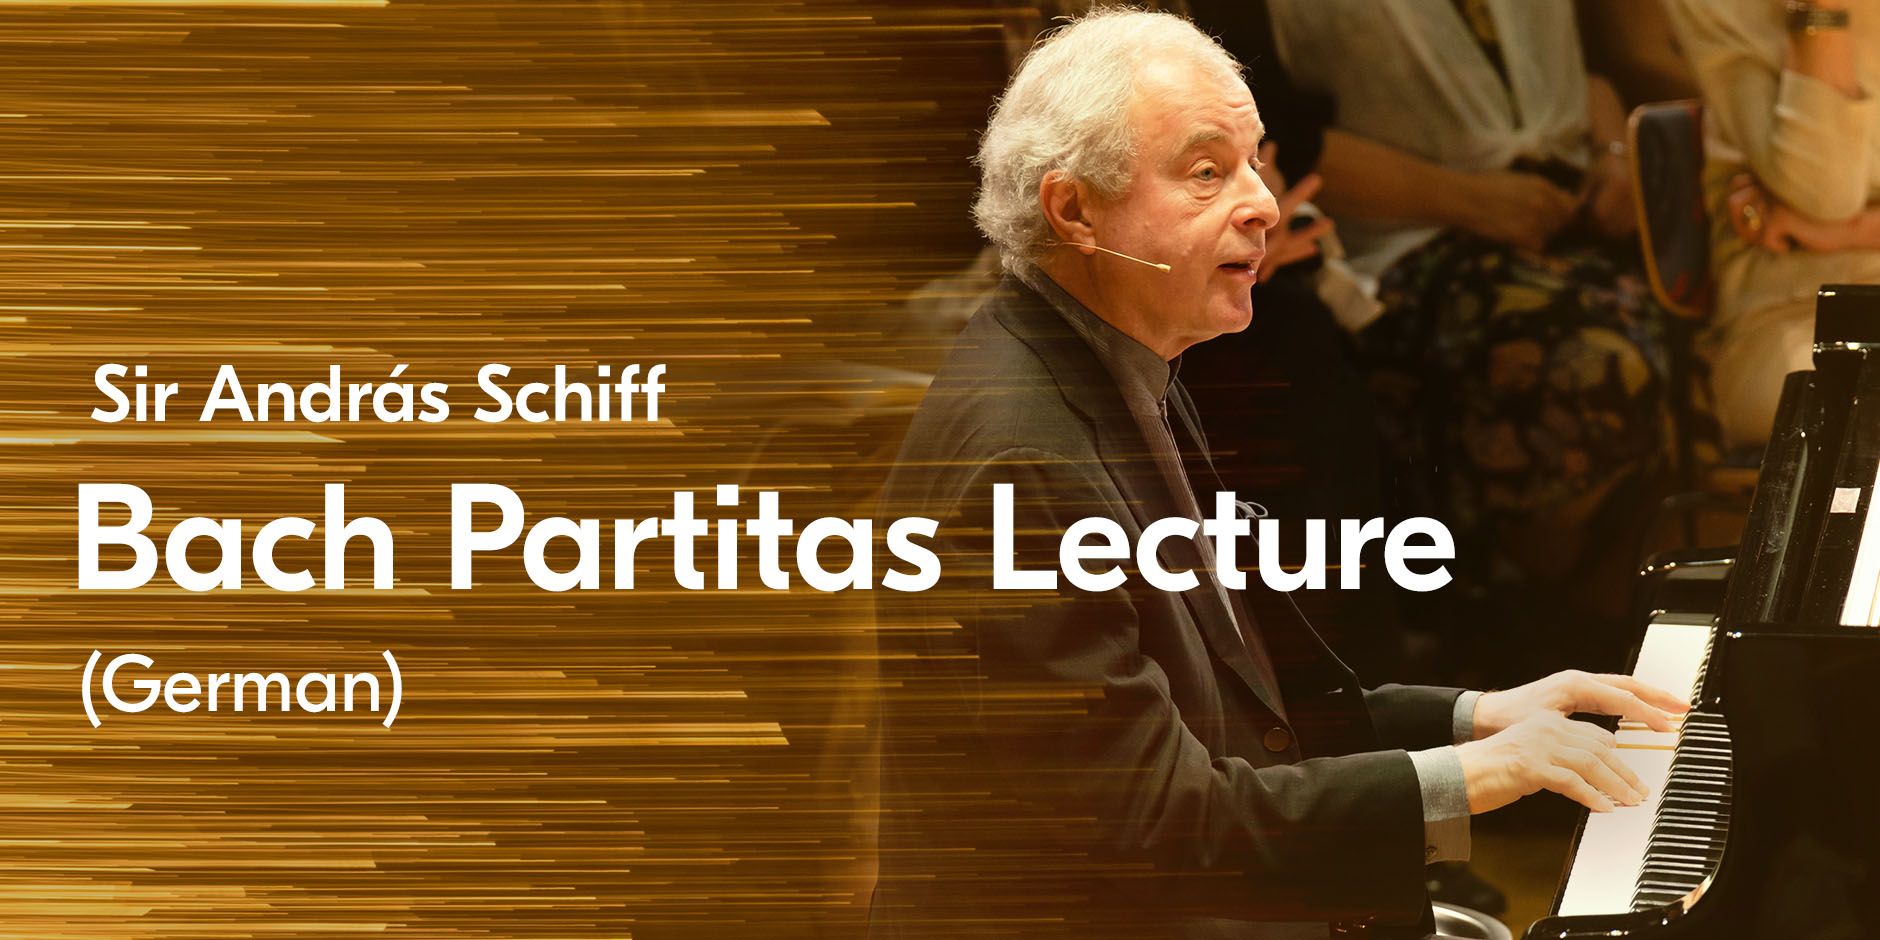 Sir András Schiff – Lecture on the Bach Partitas (DE)